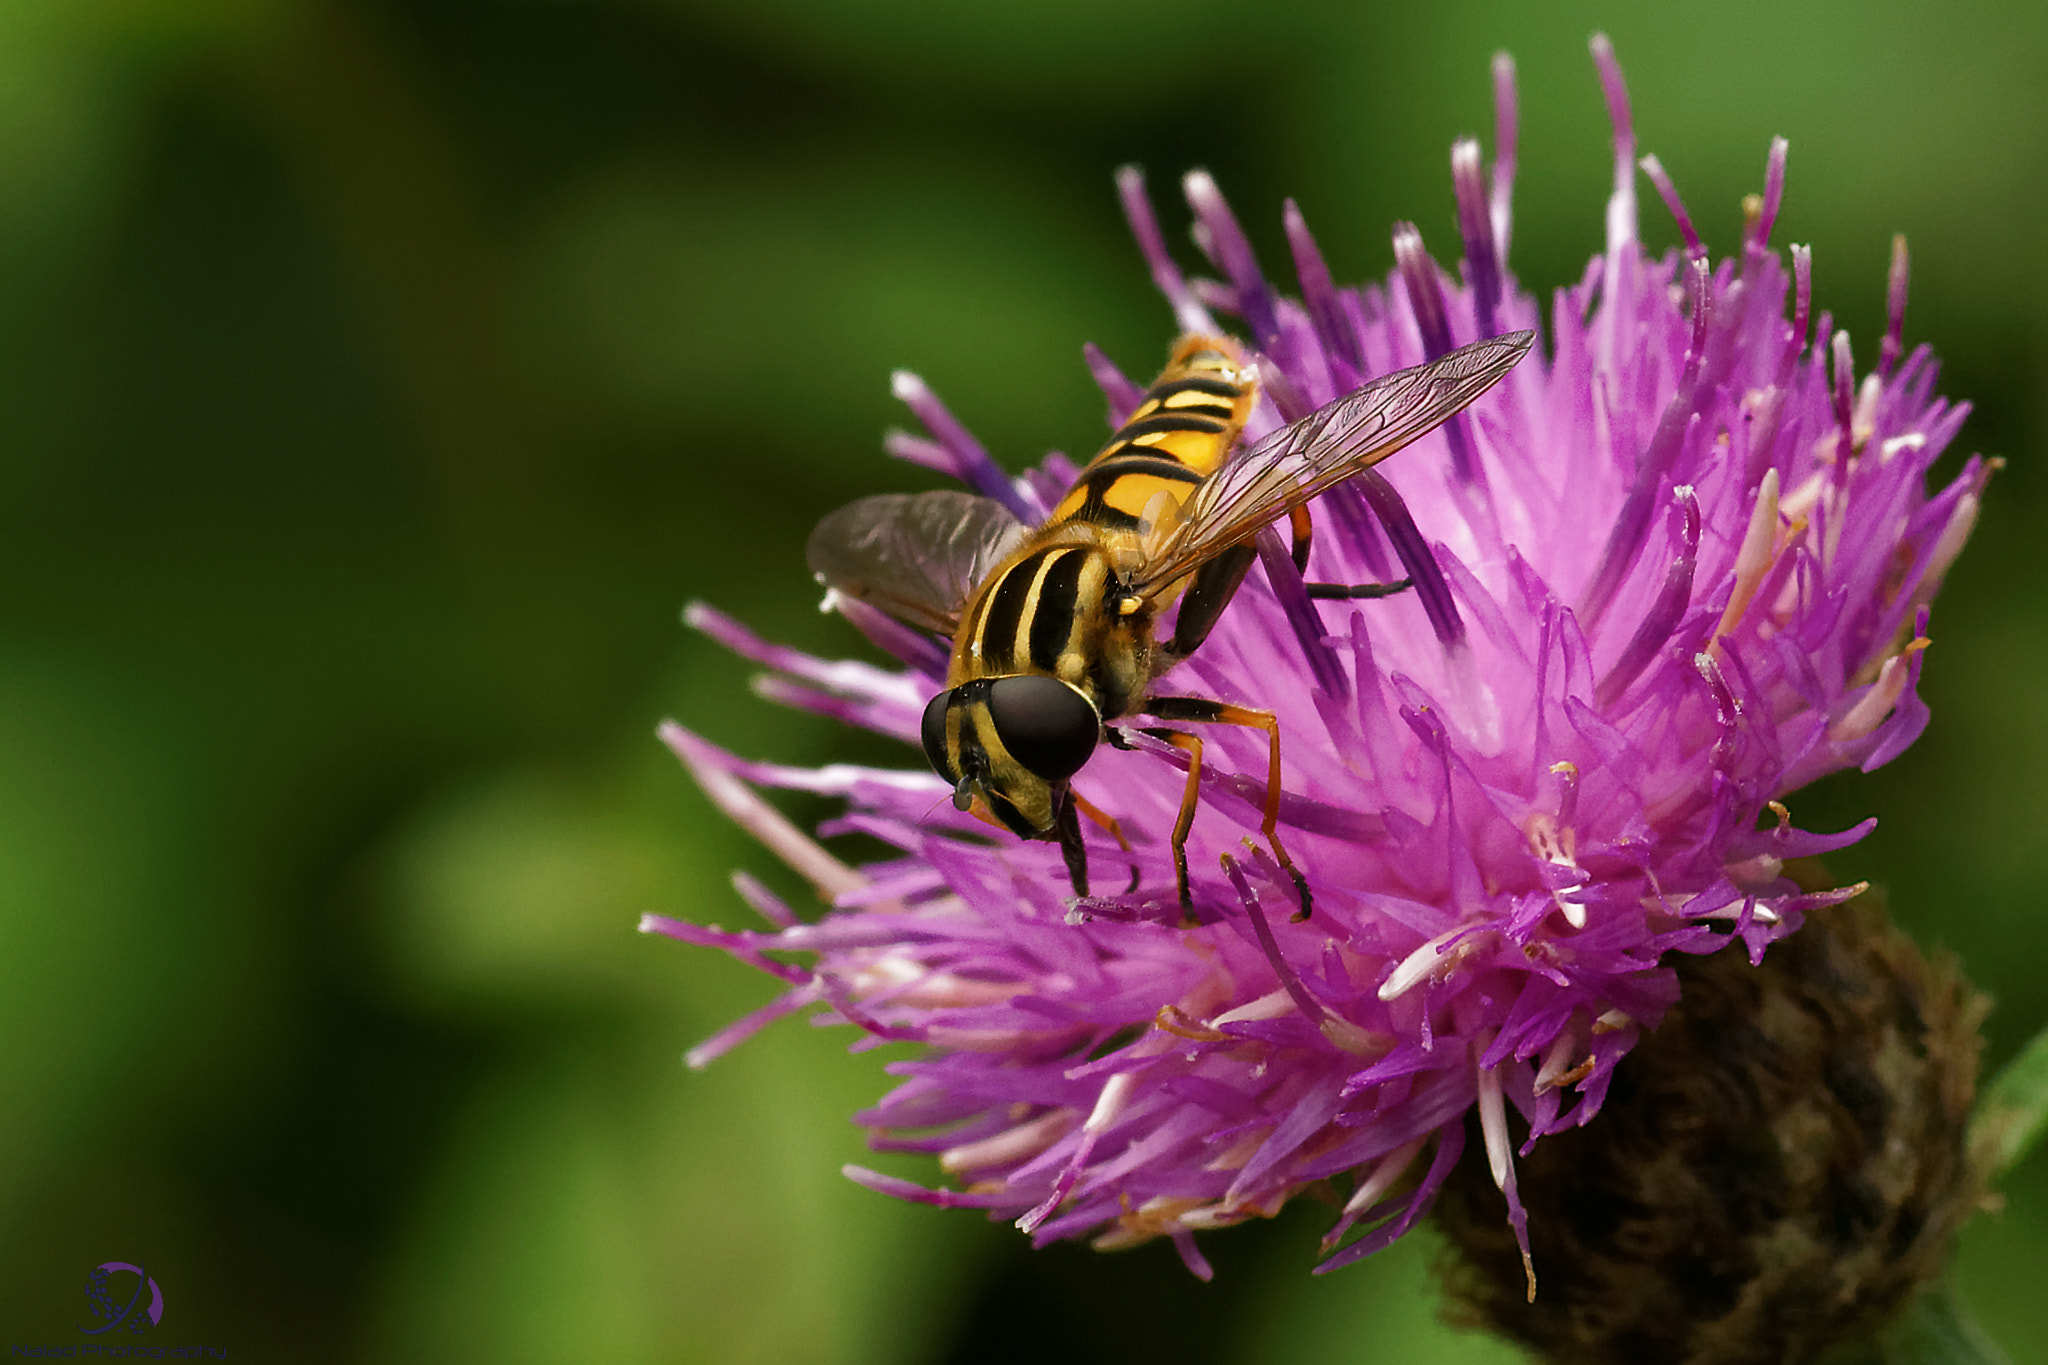 Sony a99 II + Tamron SP AF 90mm F2.8 Di Macro sample photo. Hoverfly on a flower photography